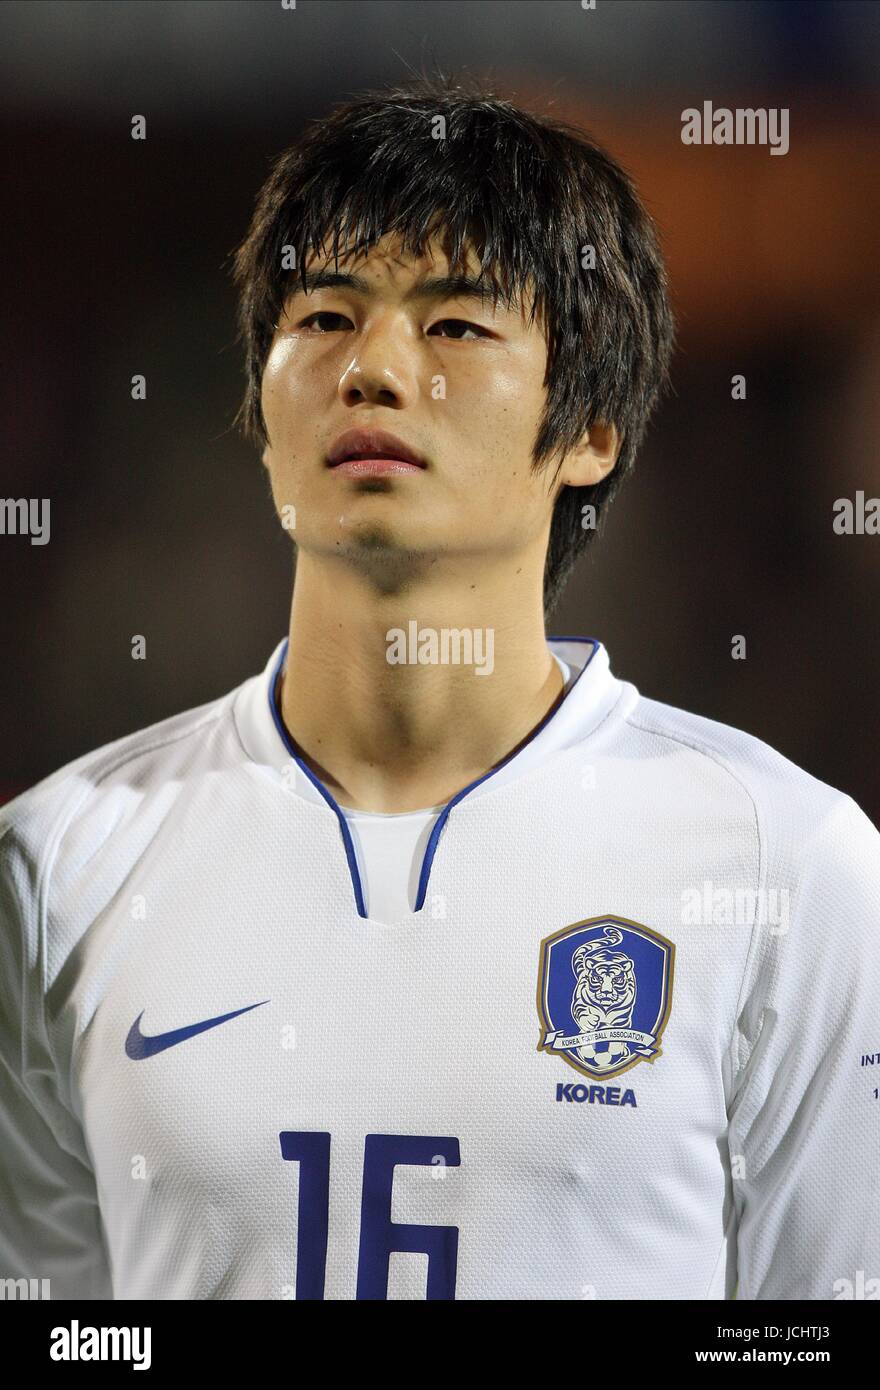 KI SUNG-YUENG SOUTH KOREA DENMARK V SOUTH KOREA BLUE WATER STADIUM,ESJBERG,DENMARK 14 November 2009 GAA3556     WARNING! This Photograph May Only Be Used For Newspaper And/Or Magazine Editorial Purposes. May Not Be Used For, Internet/Online Usage Nor For Publications Involving 1 player, 1 Club Or 1 Competition, Without Written Authorisation From Football DataCo Ltd. For Any Queries, Please Contact Football DataCo Ltd on +44 (0) 207 864 9121 Stock Photo